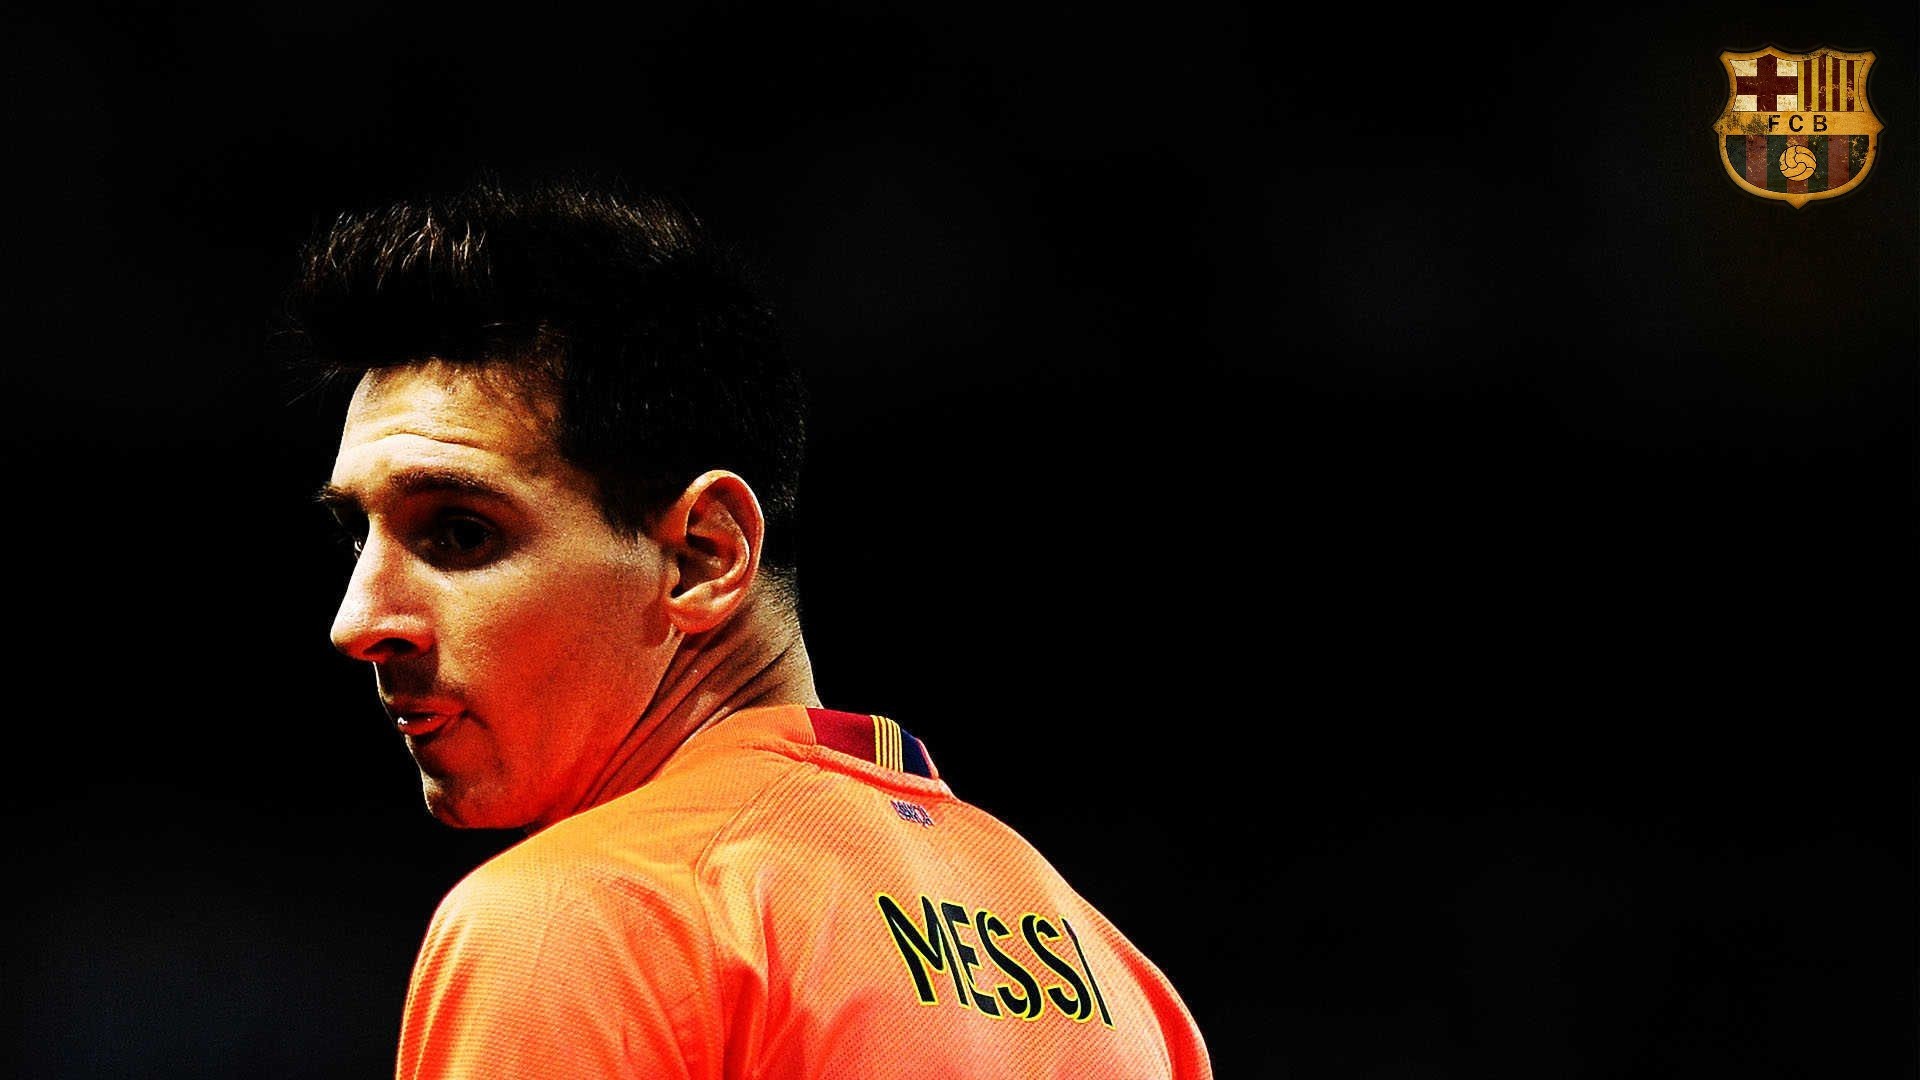 Windows Wallpaper Lionel Messi Barcelona with resolution 1920x1080 pixel. You can make this wallpaper for your Mac or Windows Desktop Background, iPhone, Android or Tablet and another Smartphone device